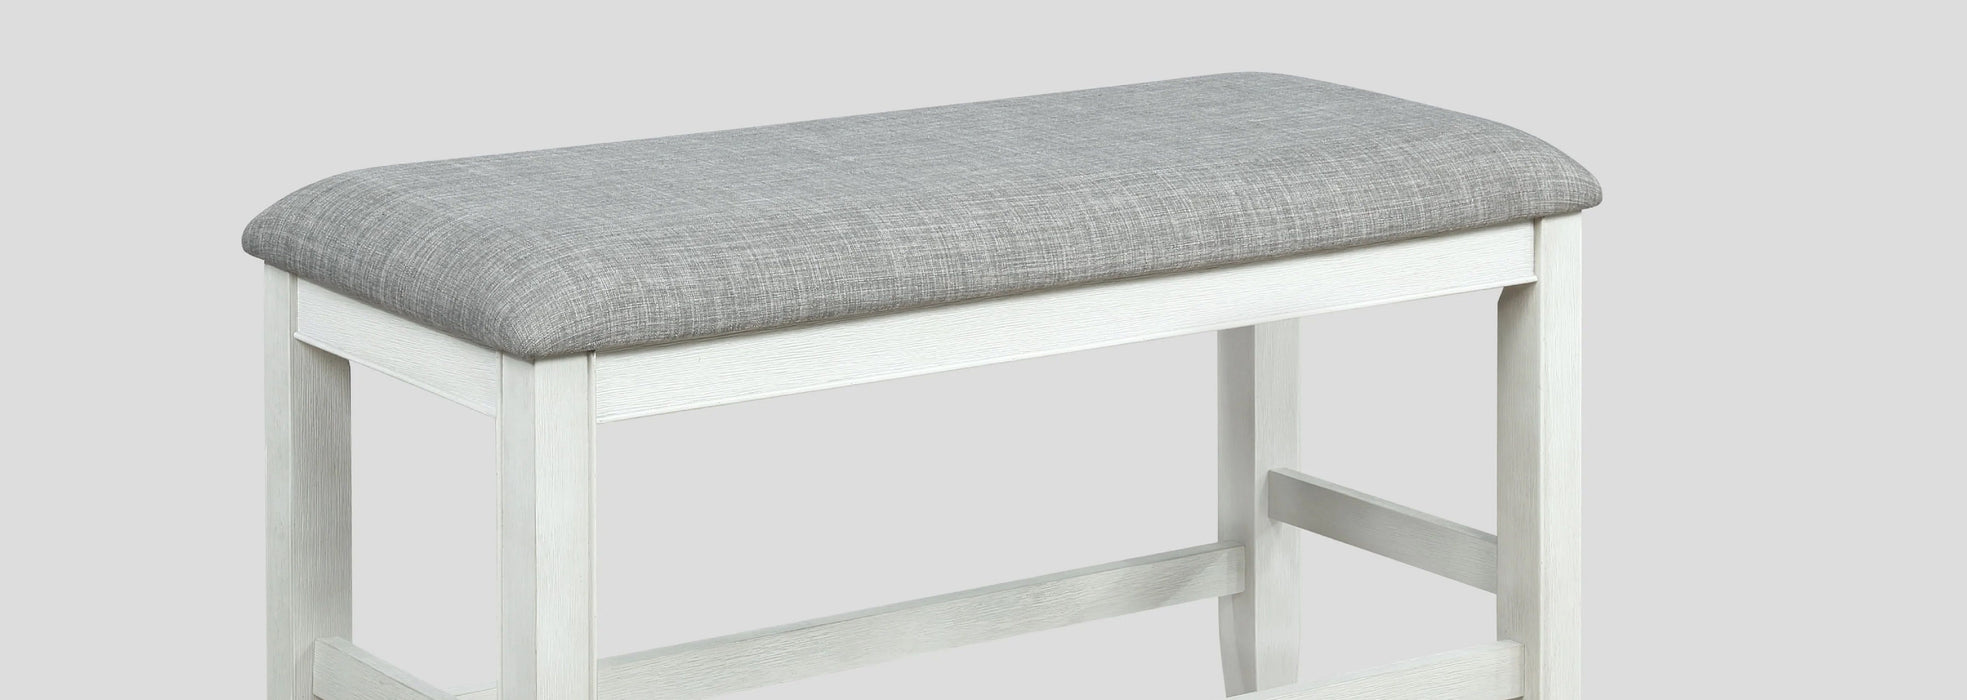 Farmhouse Style 1 Piece White Counter Height Bench Footrest Chalk Gray Upholstered Seat Wooden Furniture